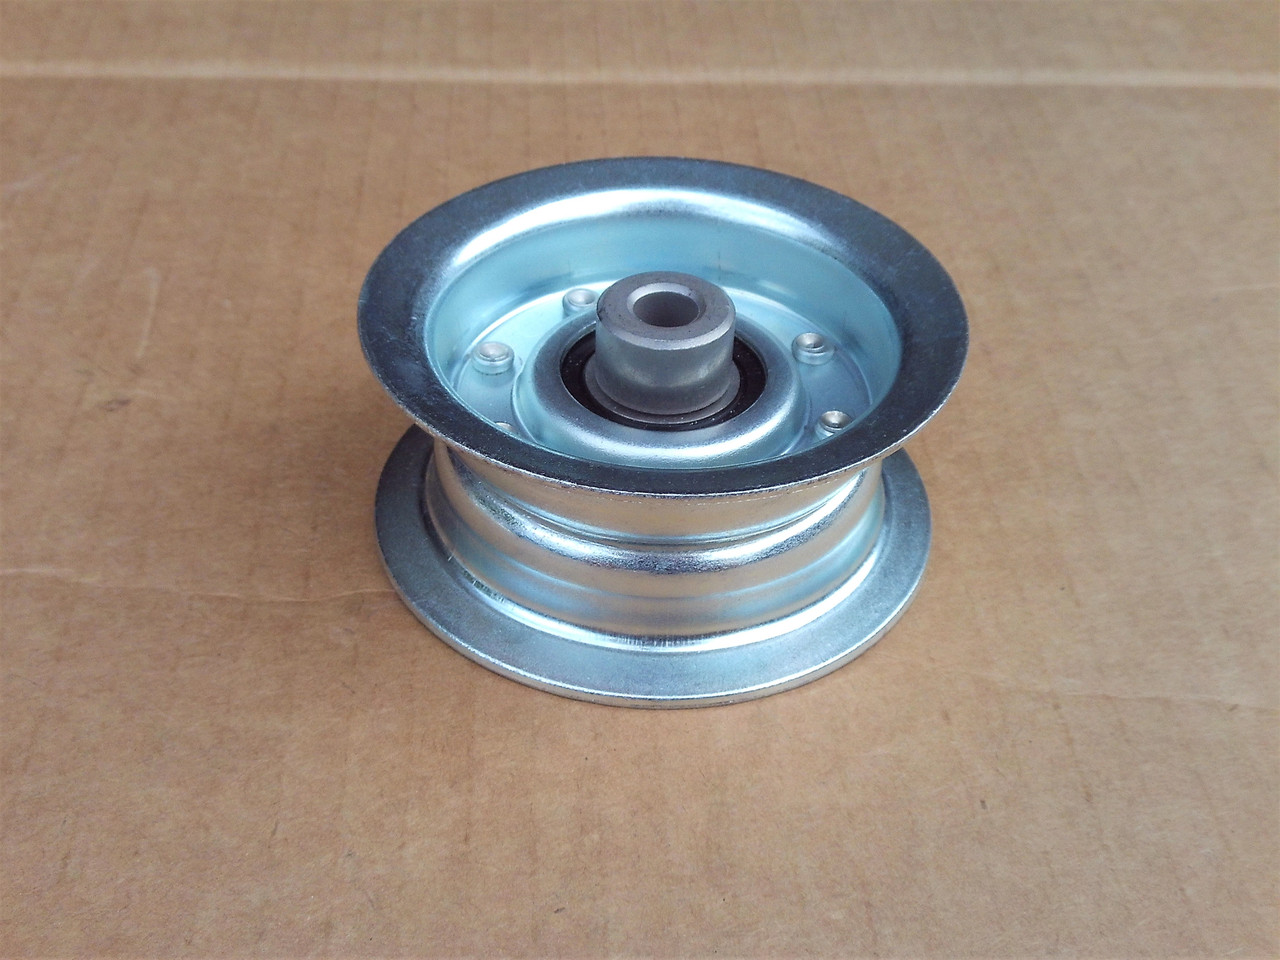 Idler Pulley for Gravely 027892, 20486500 ID: 3/8", OD: 3-1/2", Height: 1-9/16" Flat